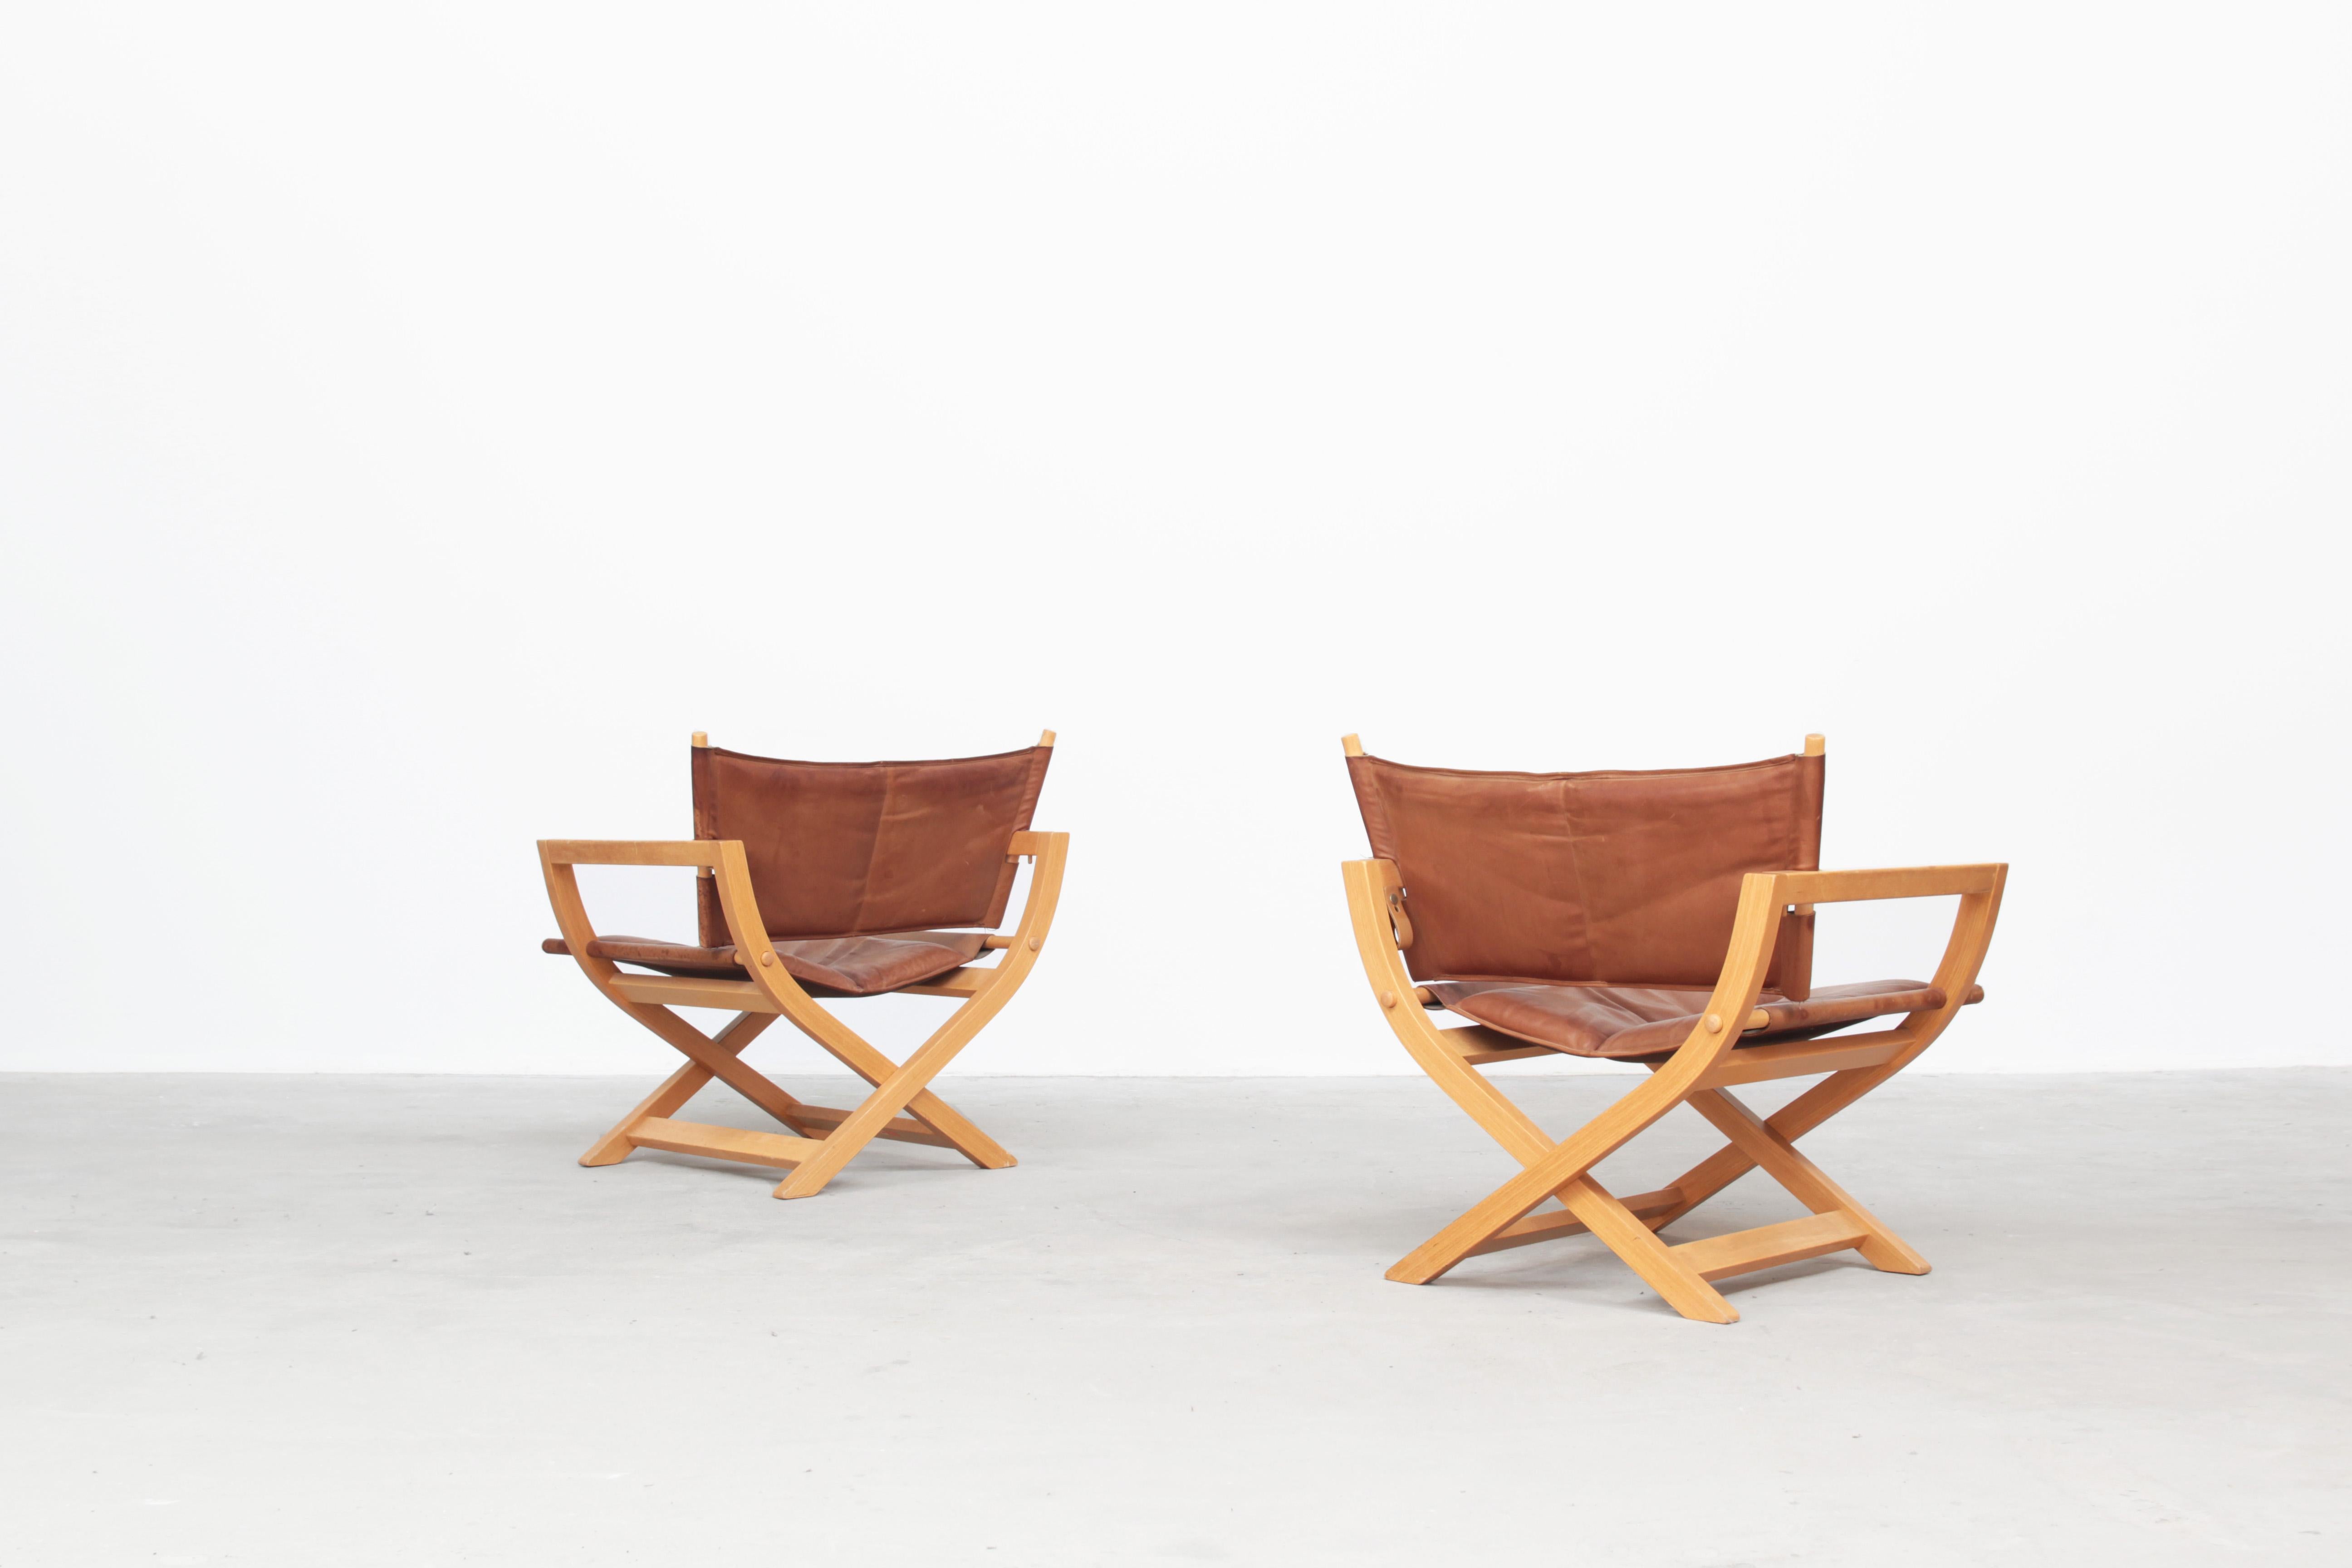 A pair of beautiful folding leather lounge chairs, manufactured by Westnofa in the 1960s.
Both chairs are covered with brown patinated leather and come in a good used condition.
The chairs are foldable.